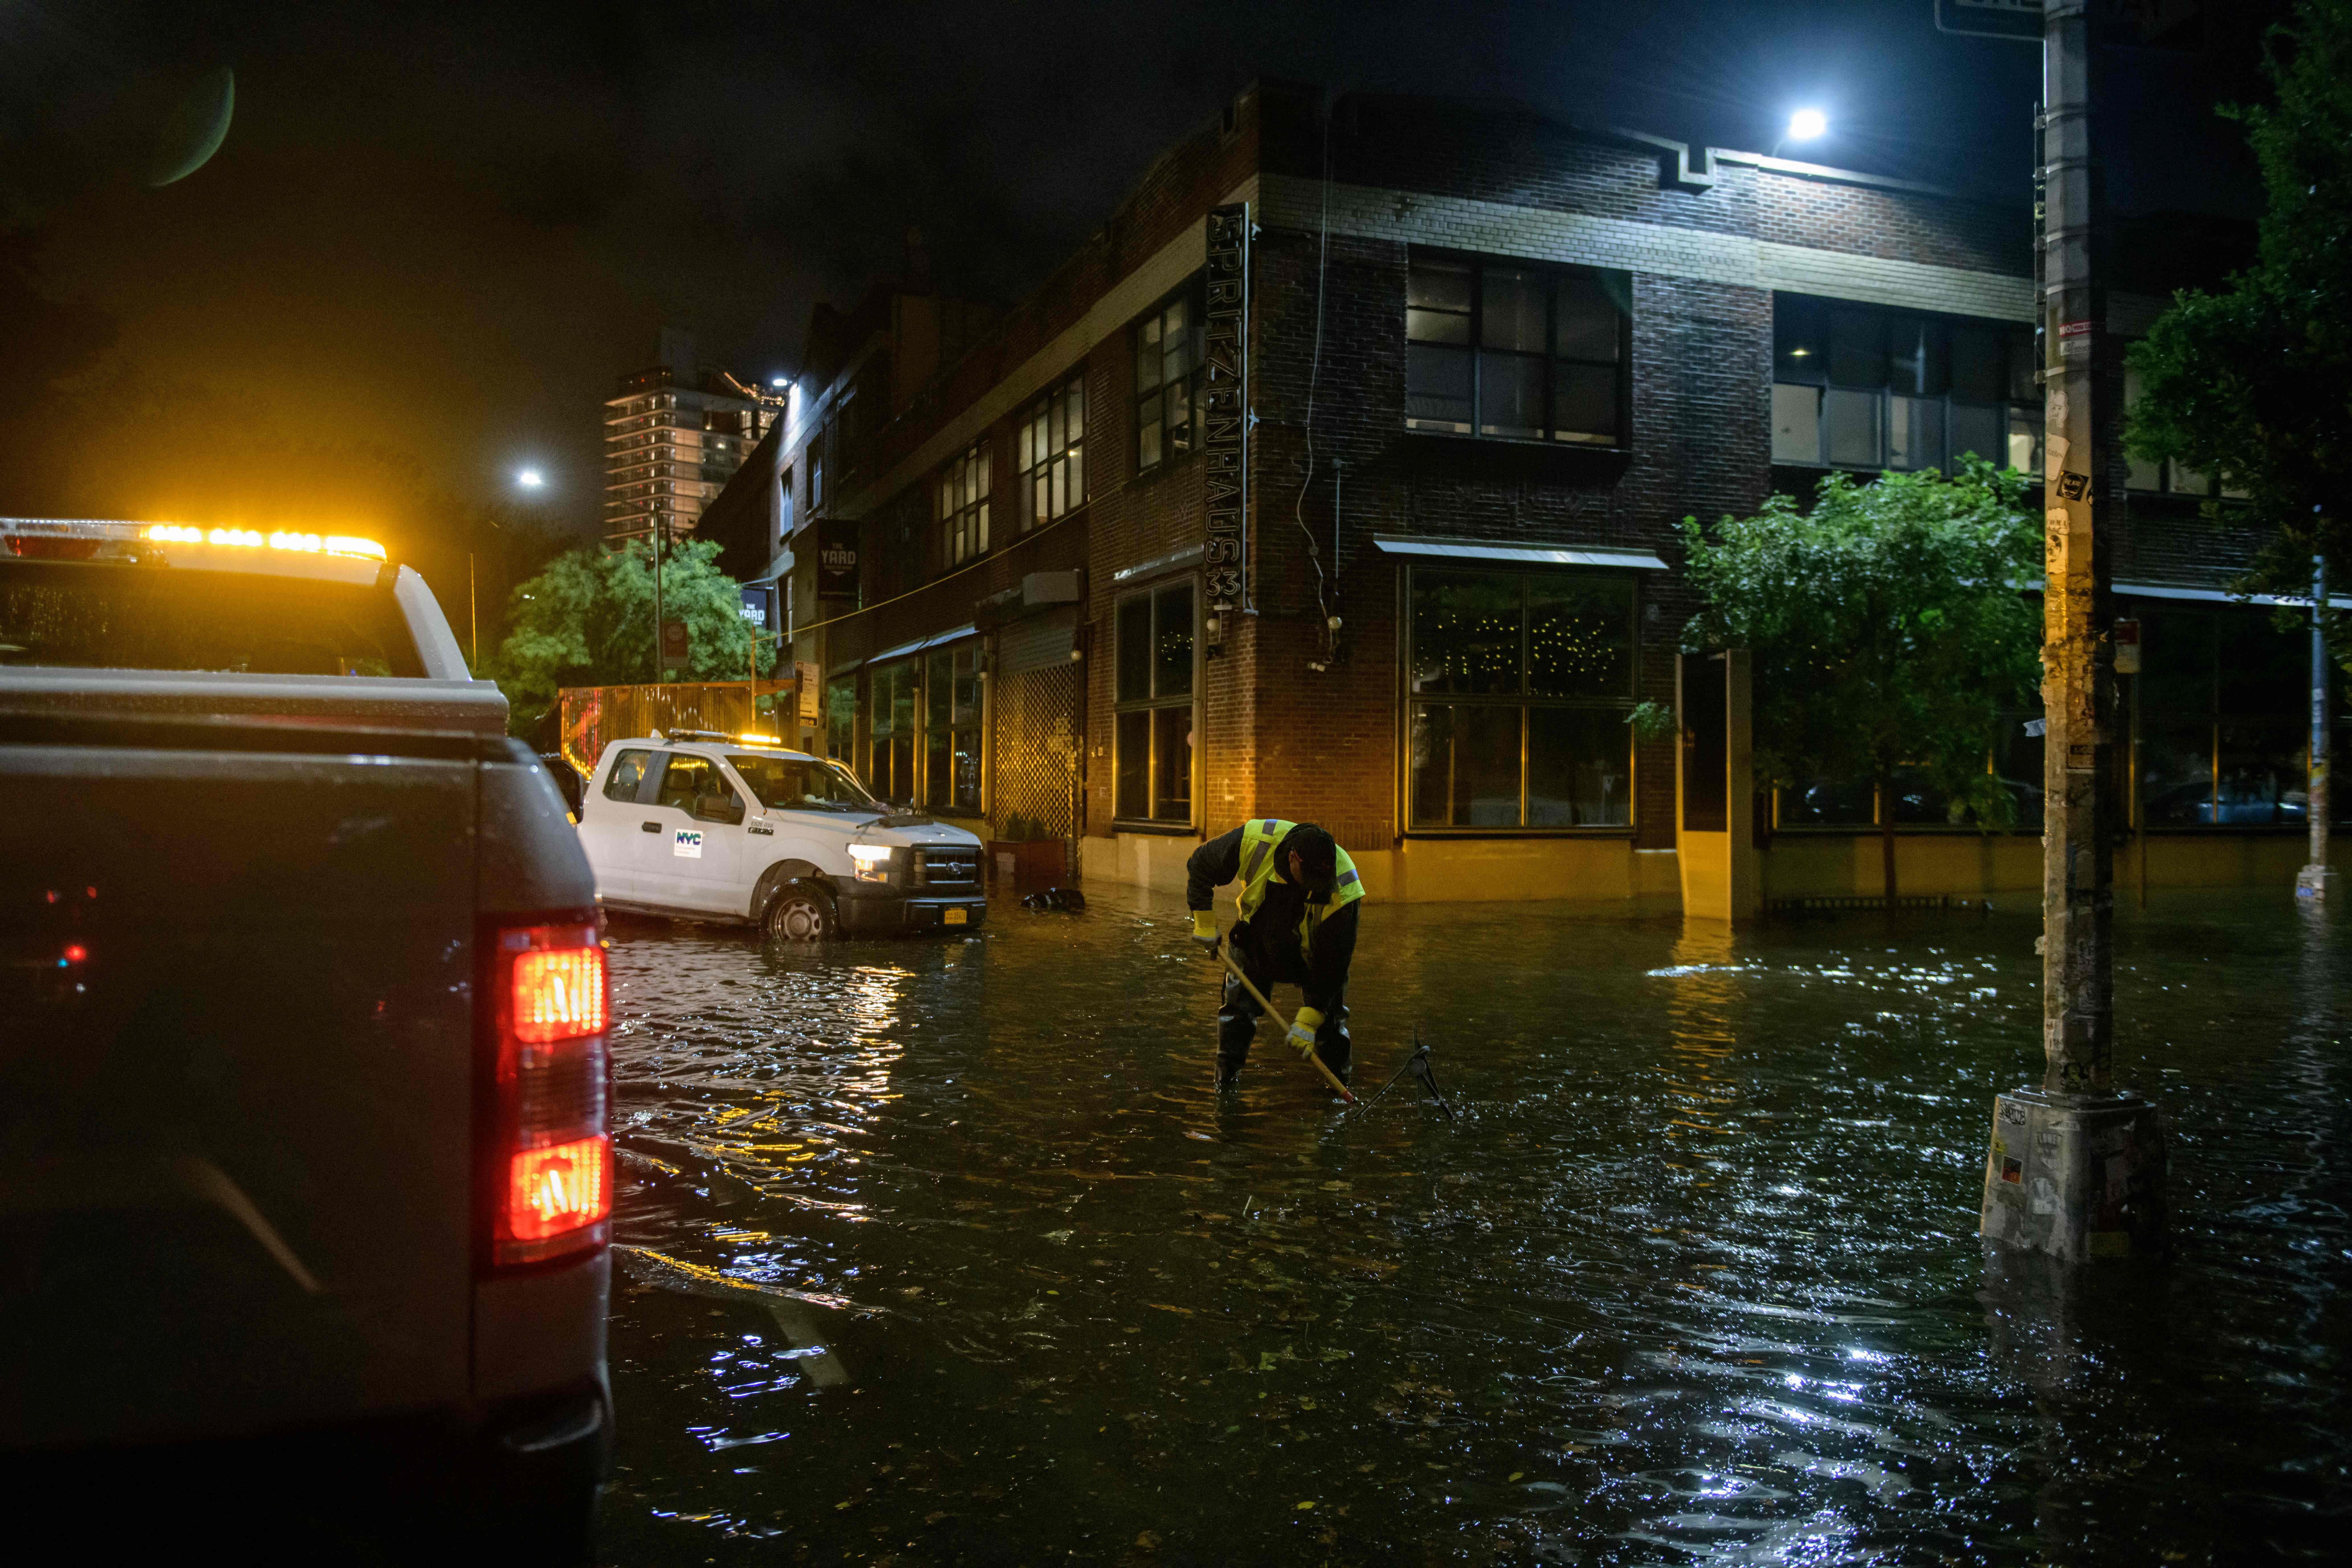 A worker unblocks drains on a street affected by floodwater in Brooklyn.